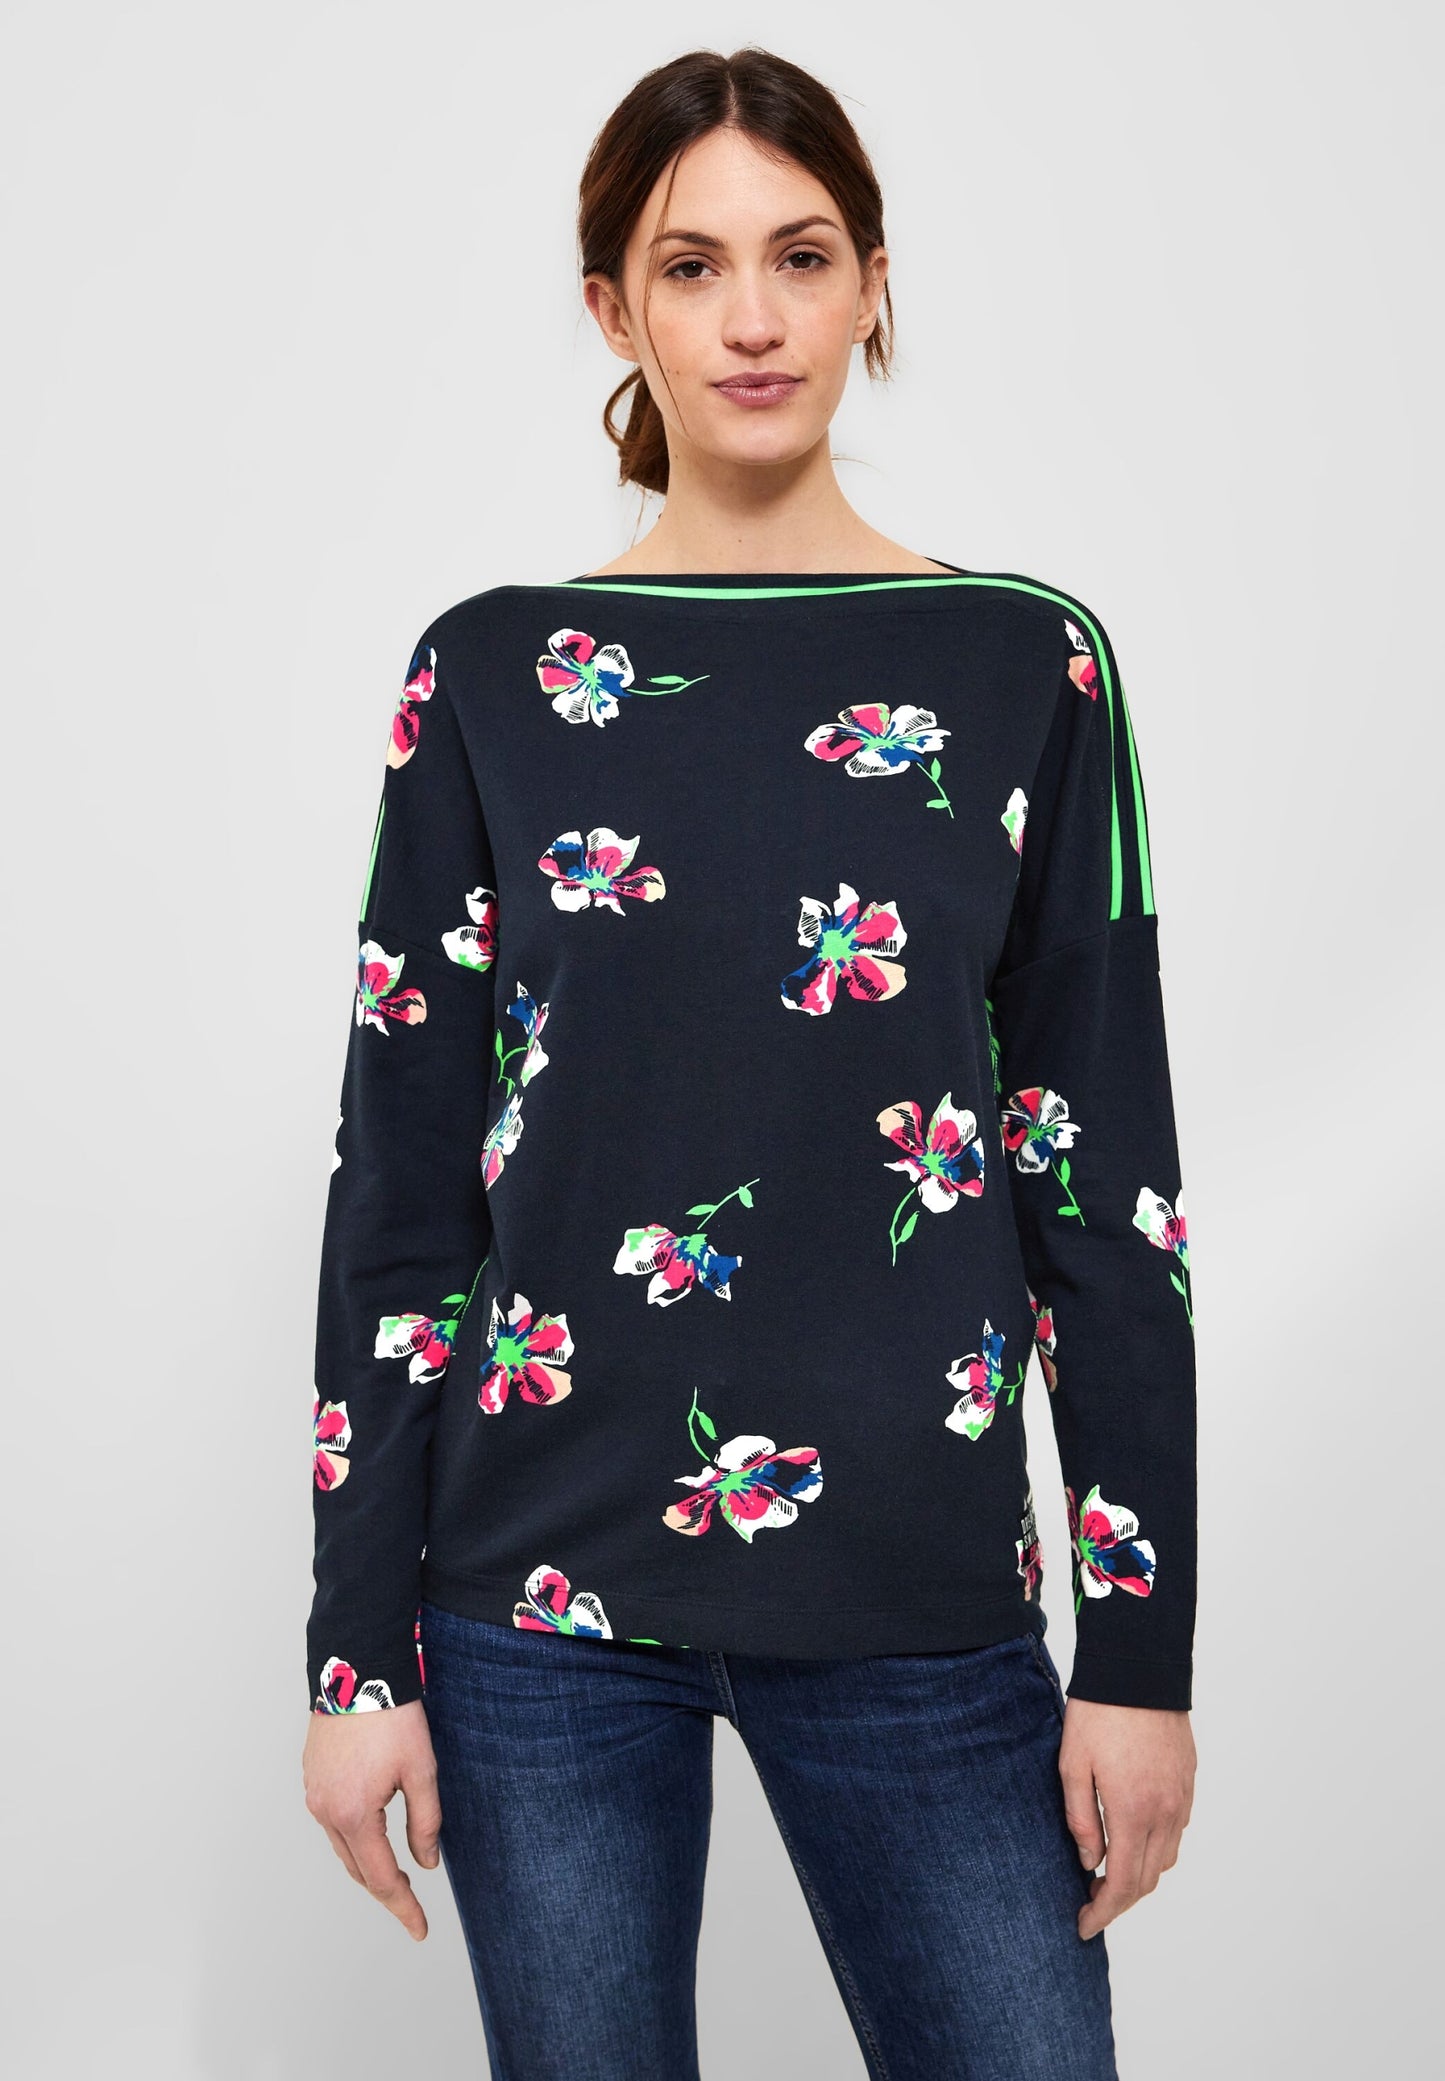 Long-sleeved shirt in a print mix